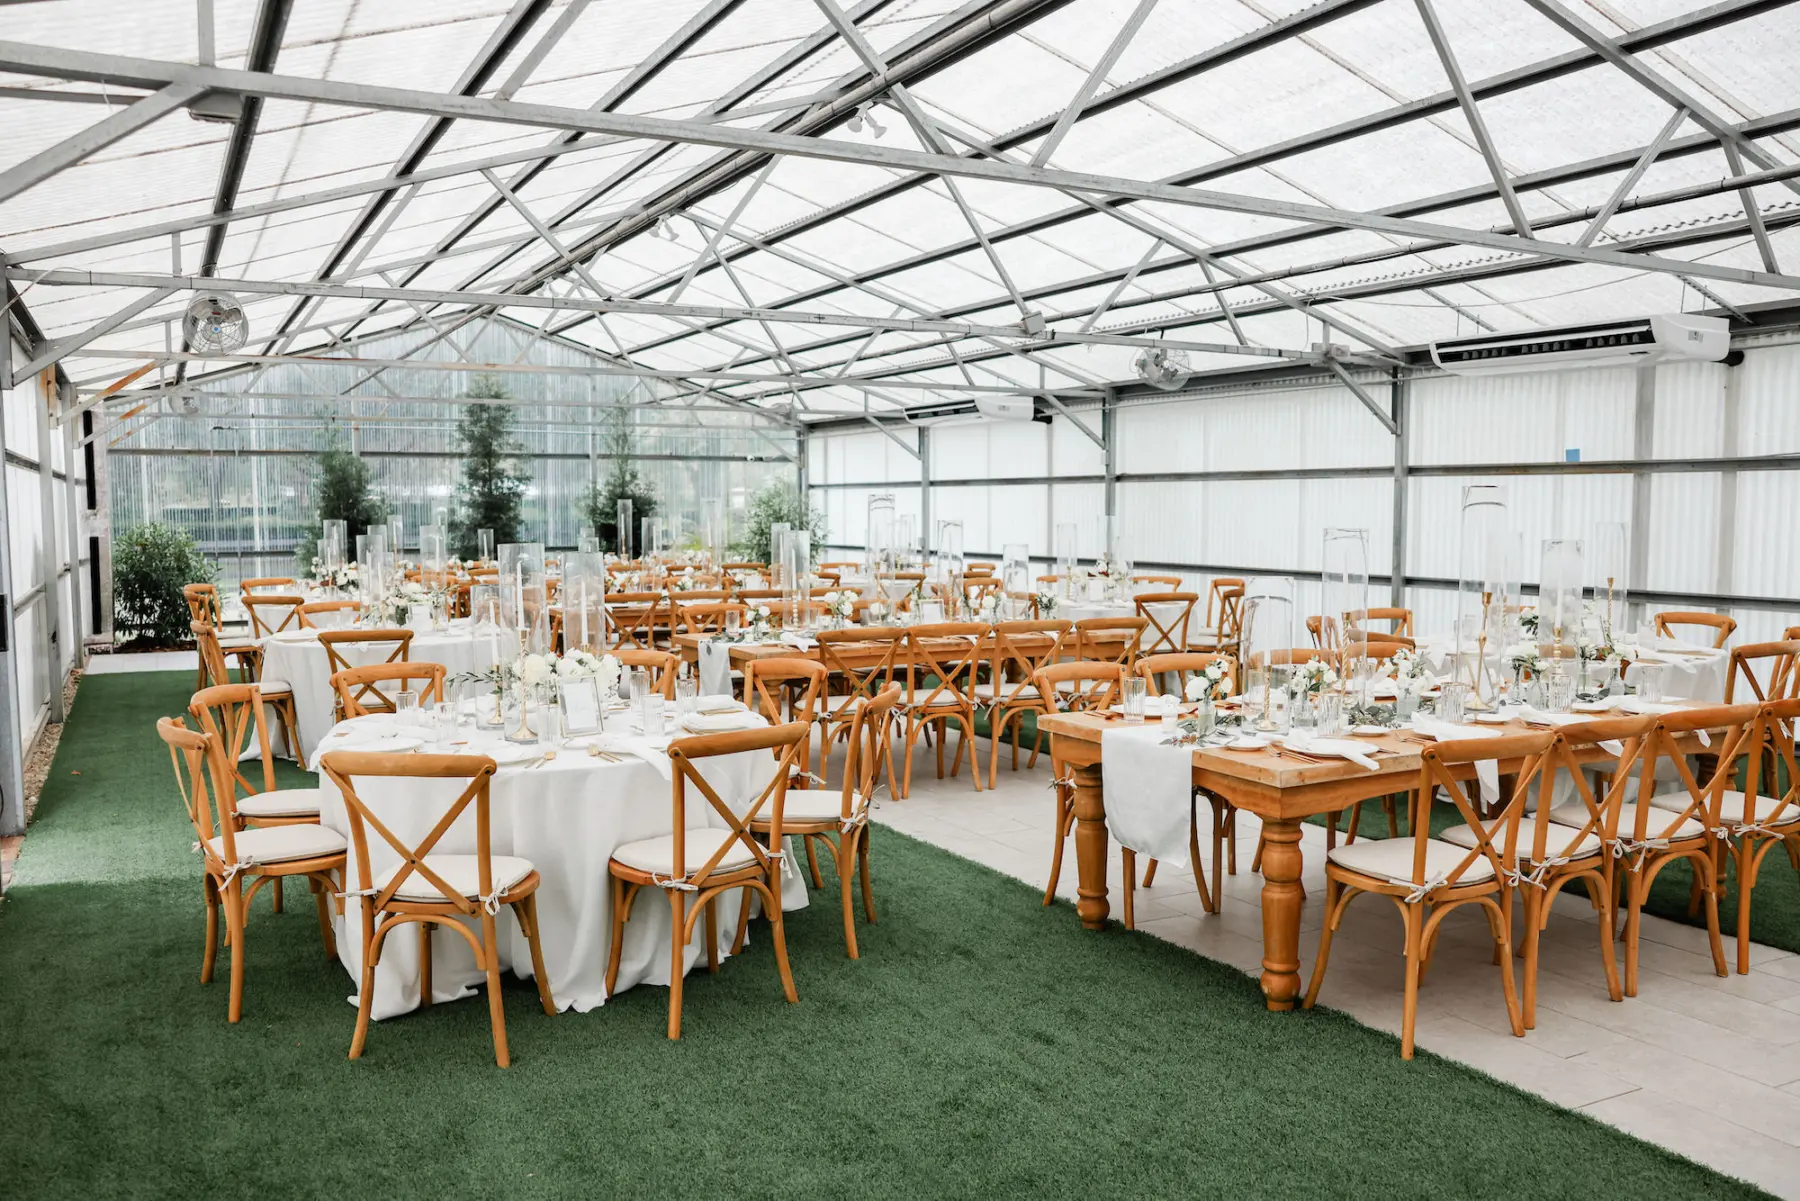 Clear Tented Classic White and Gold Wedding Reception Inspiration | Wooden Tables and Crossback Chairs | Tampa Bay Kate Ryan Event Rentals | Planner Blue Skies Weddings and Events | Private Estate Mision Lago